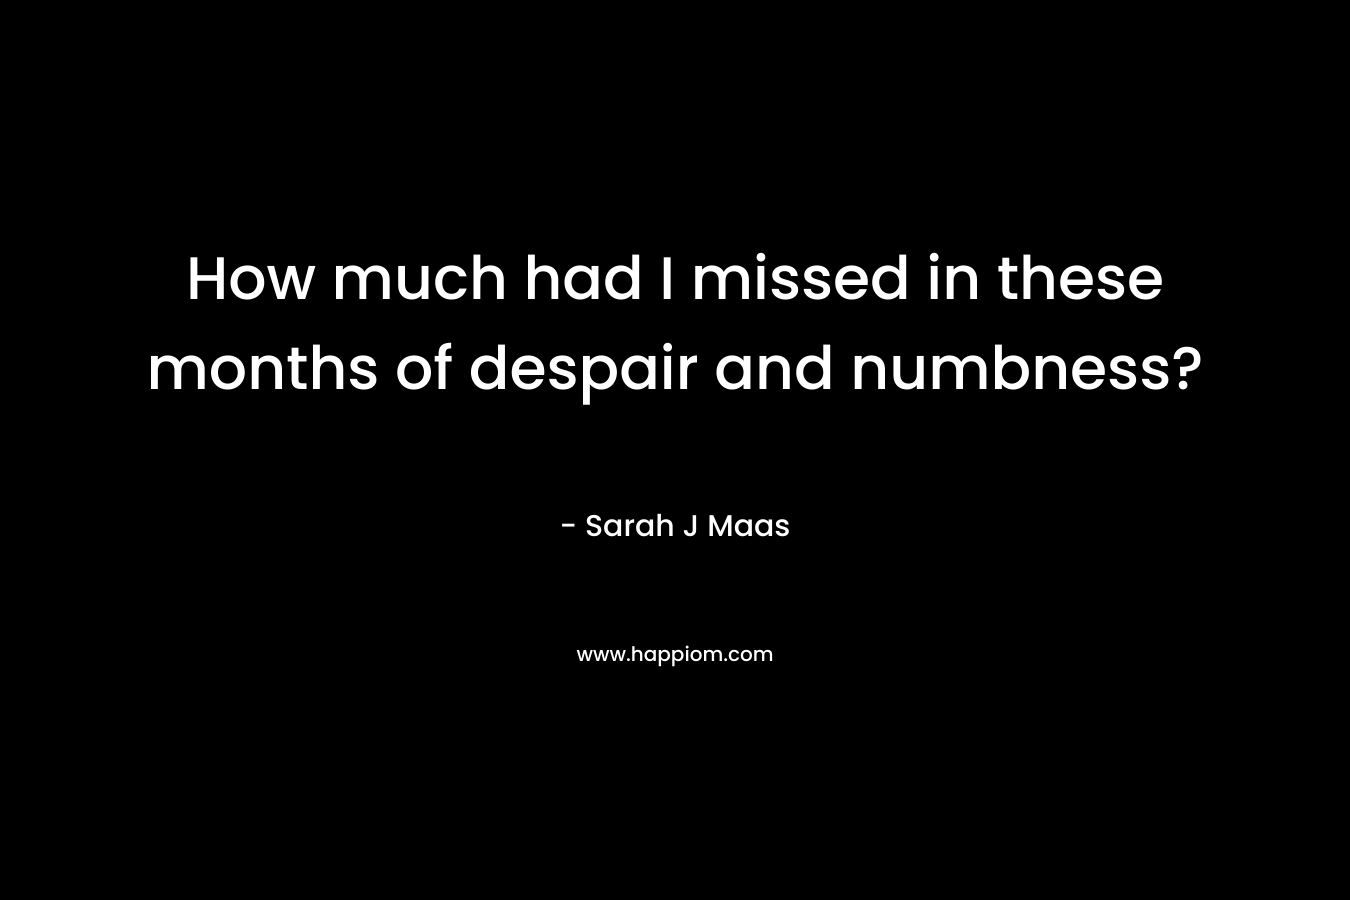 How much had I missed in these months of despair and numbness? – Sarah J Maas